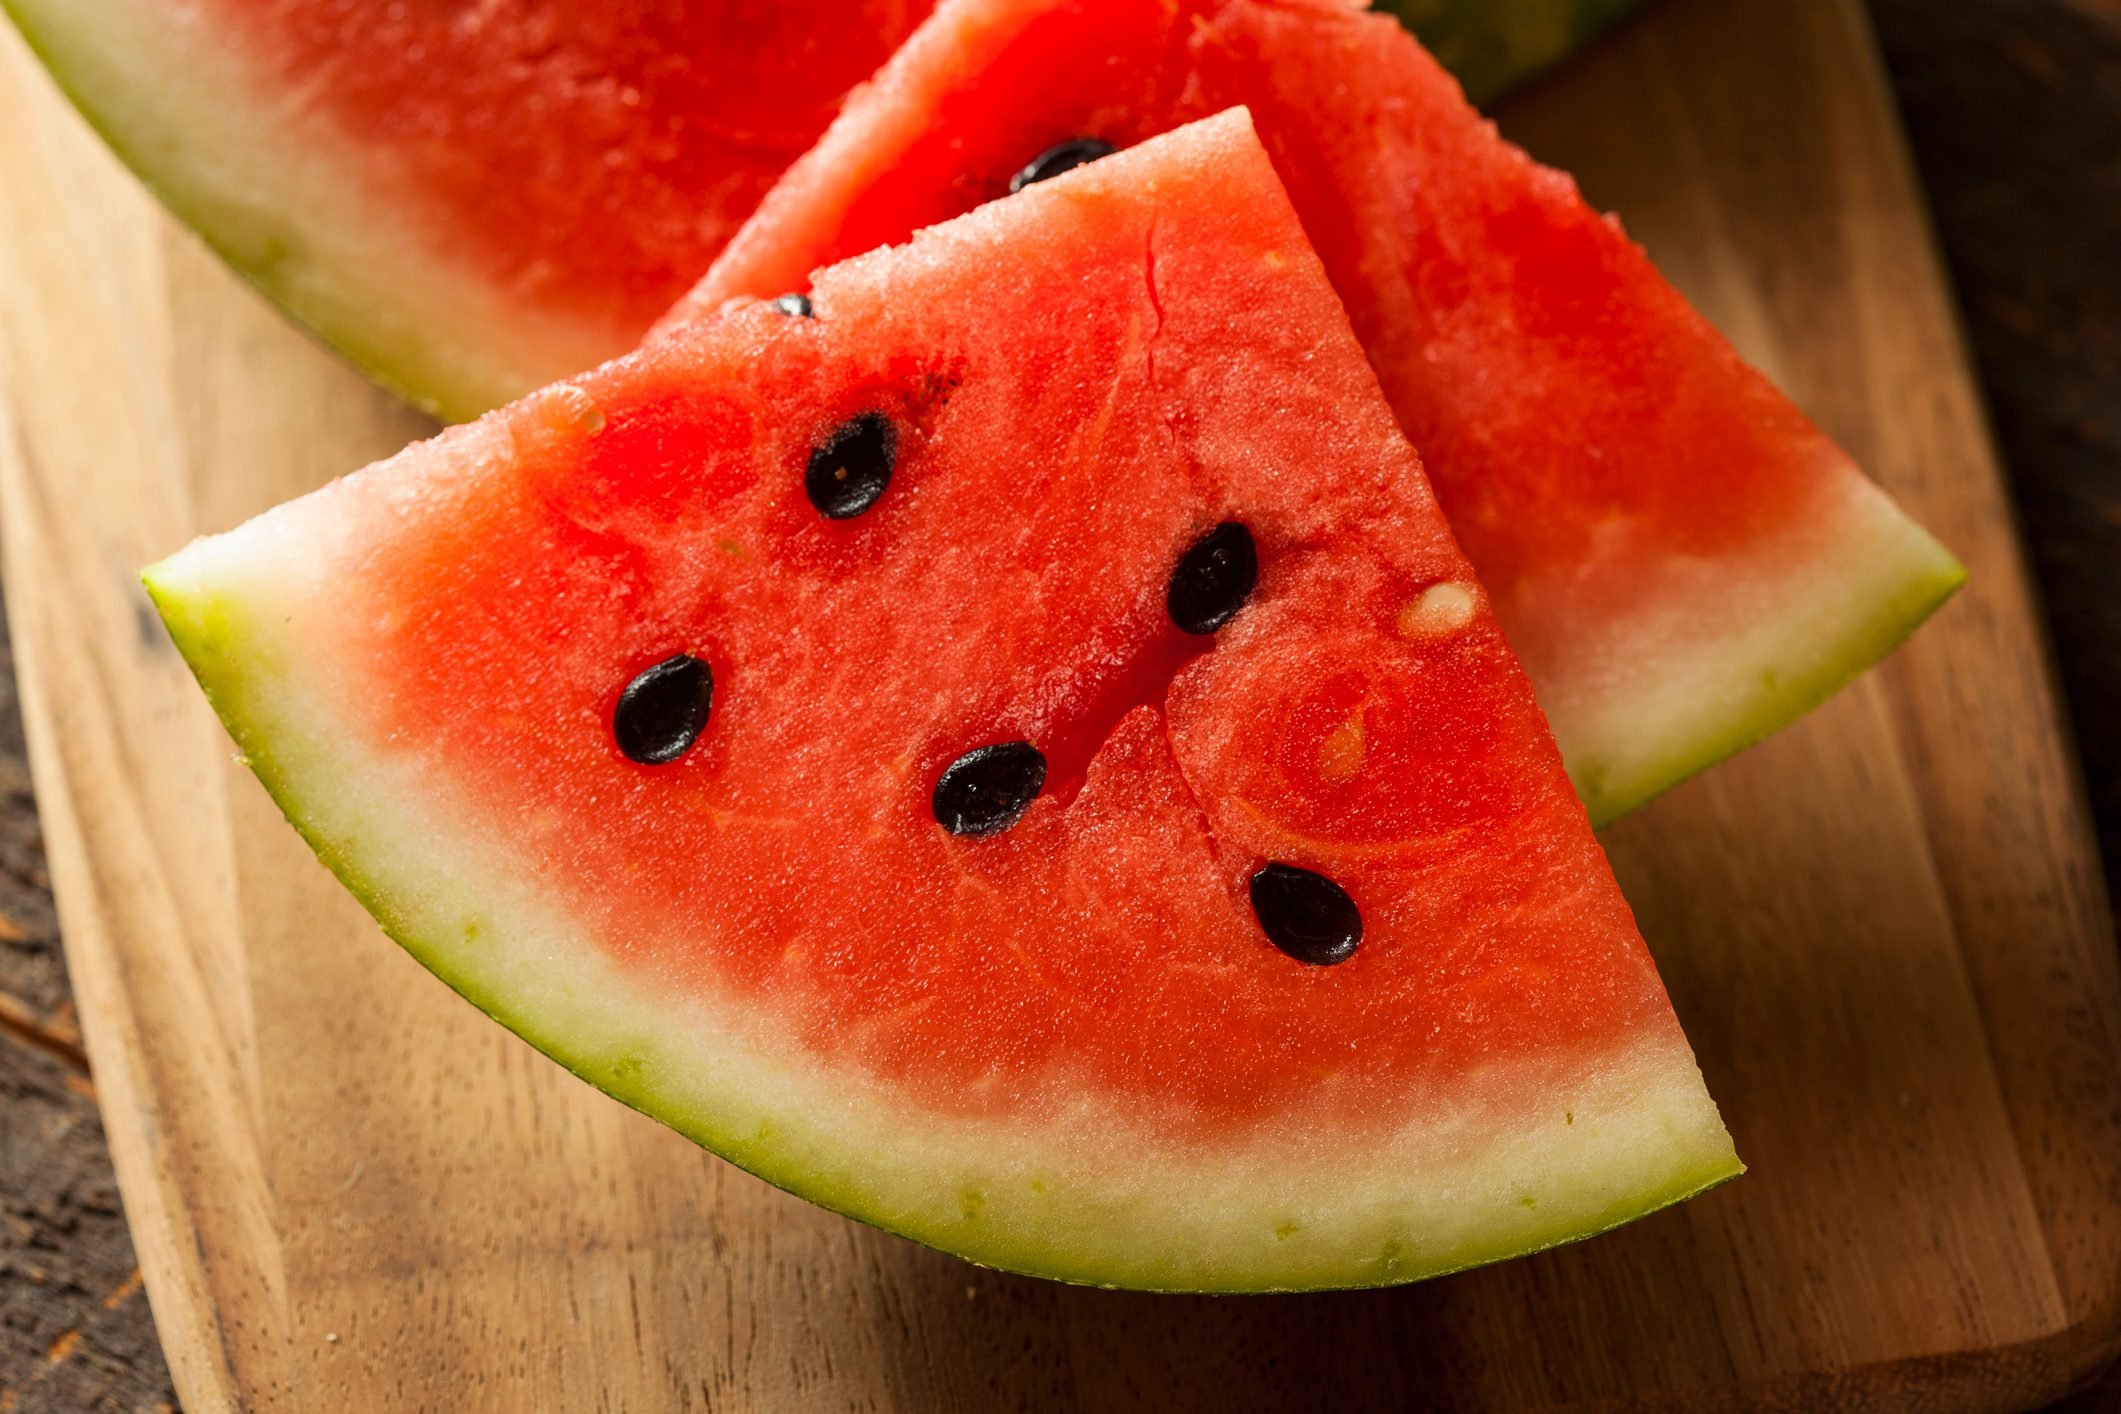 Can You Eat Watermelon Seeds?